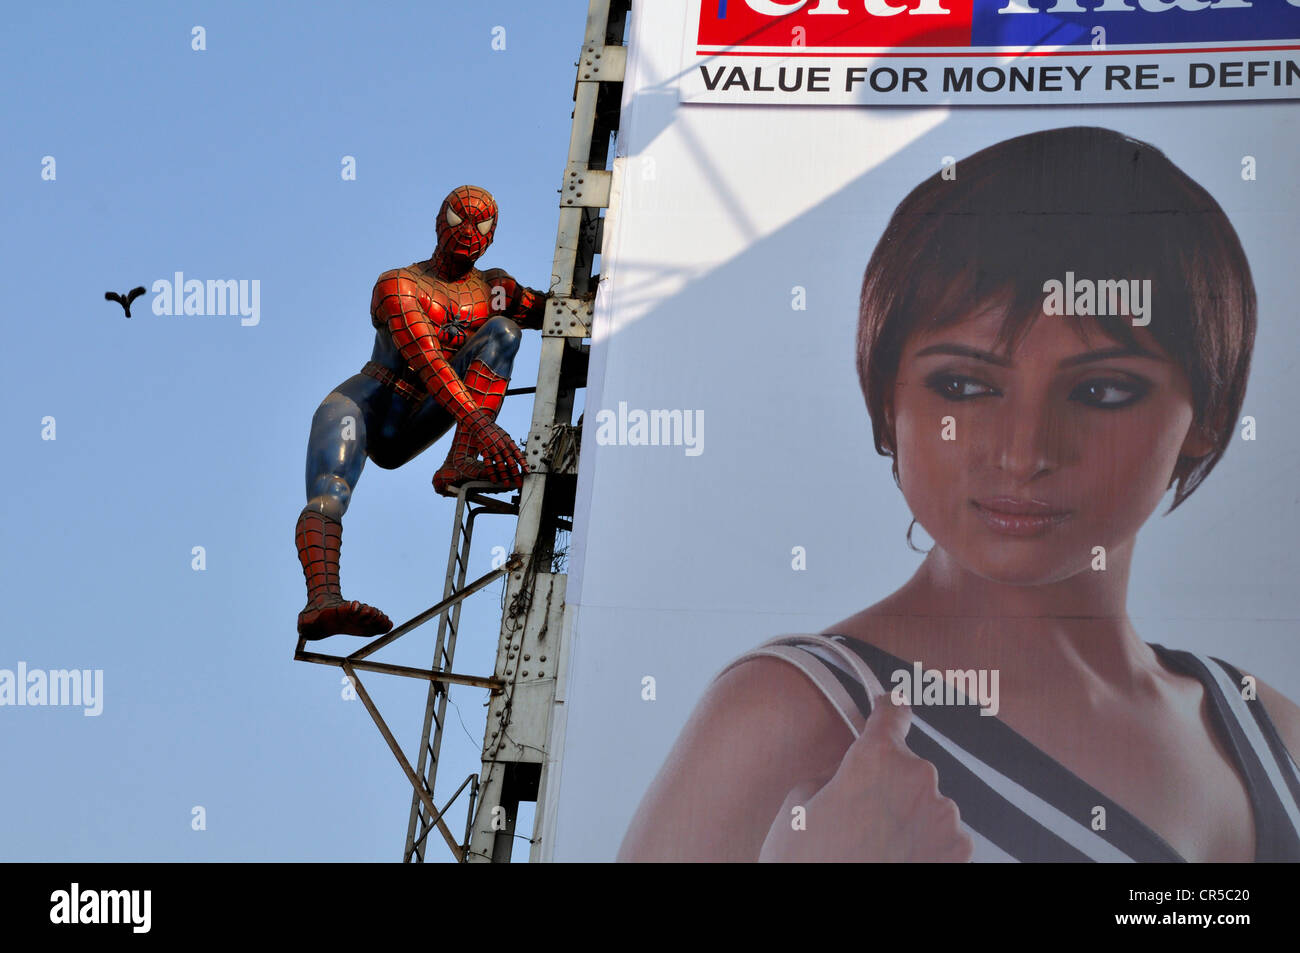 India, West Bengal State, Calcutta (Kolkata), Chowringhee District, New Market, giant advertising sign and Spiderman dummy Stock Photo